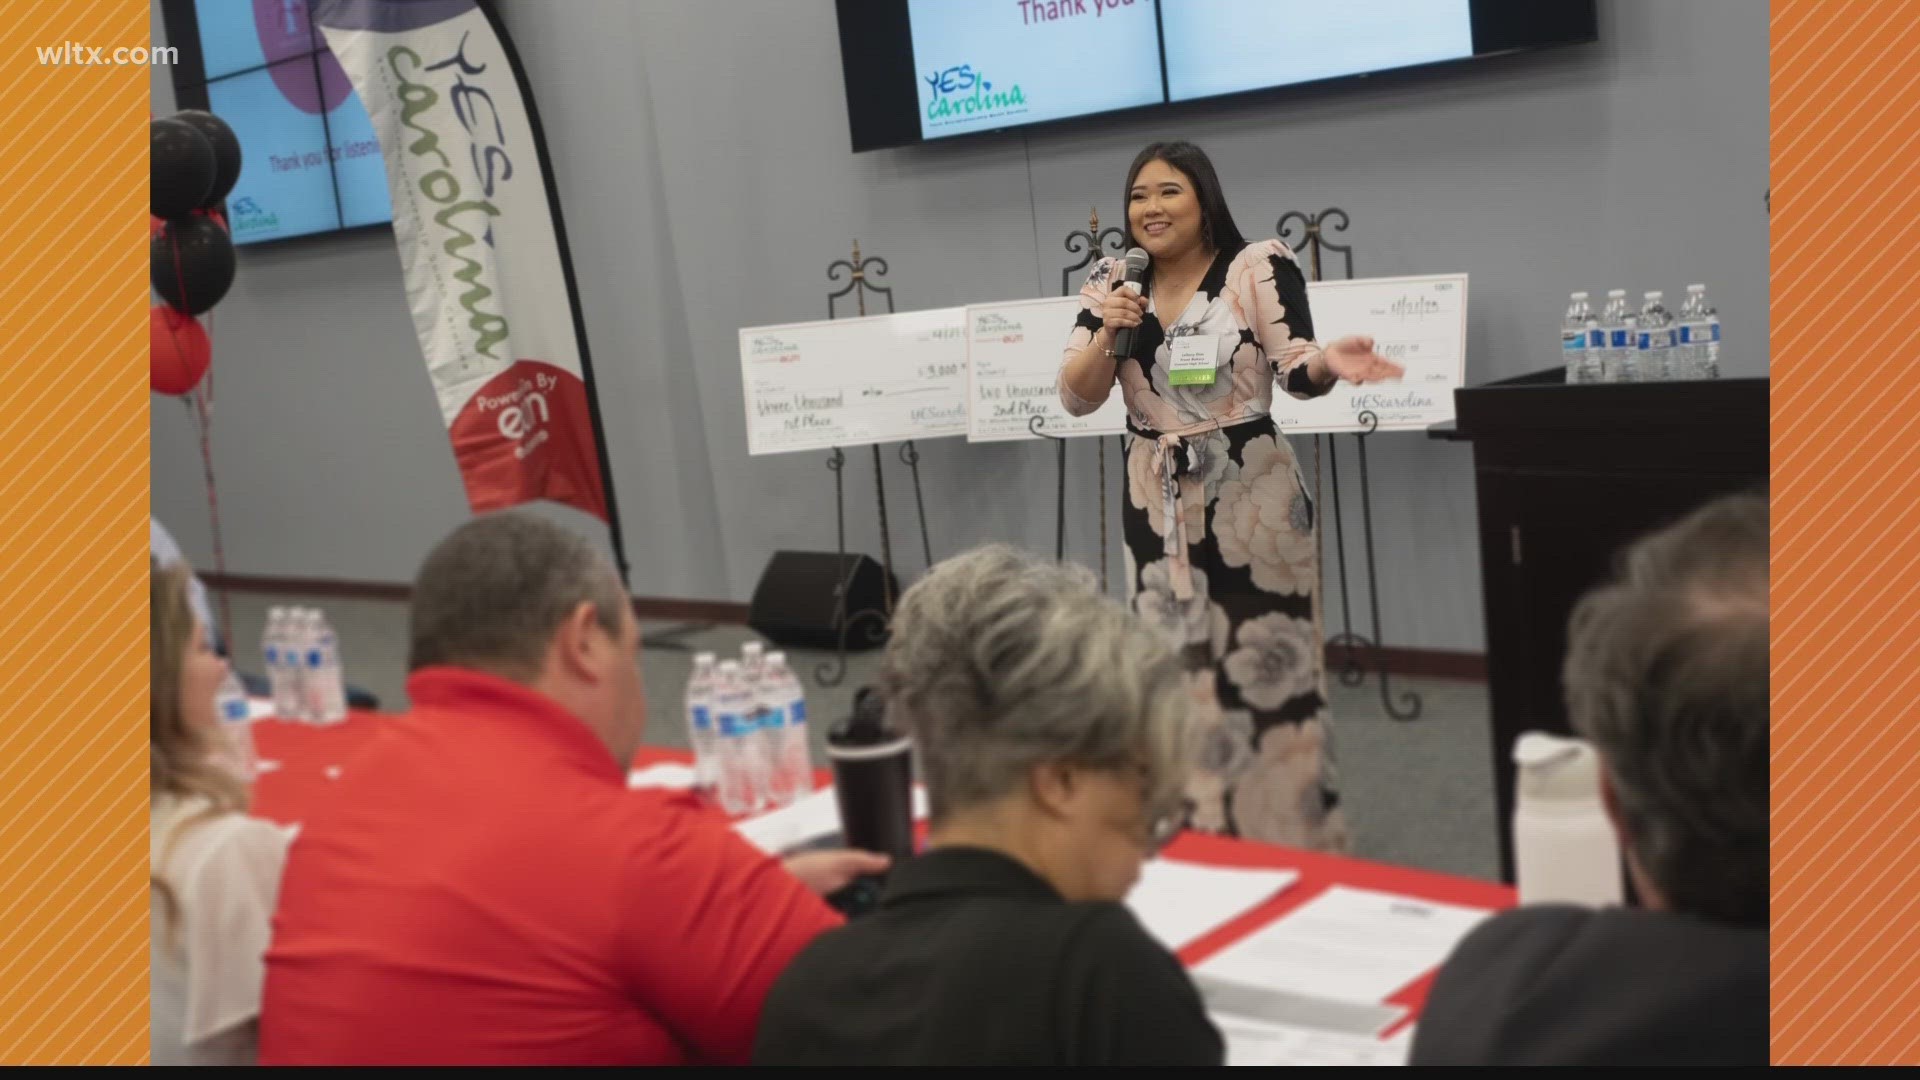 Non-profit Engaging Creative Minds hosts entrepreneurship courses in SC schools. Students will pitch their business idea in a Shark Tank-style competition April 26th